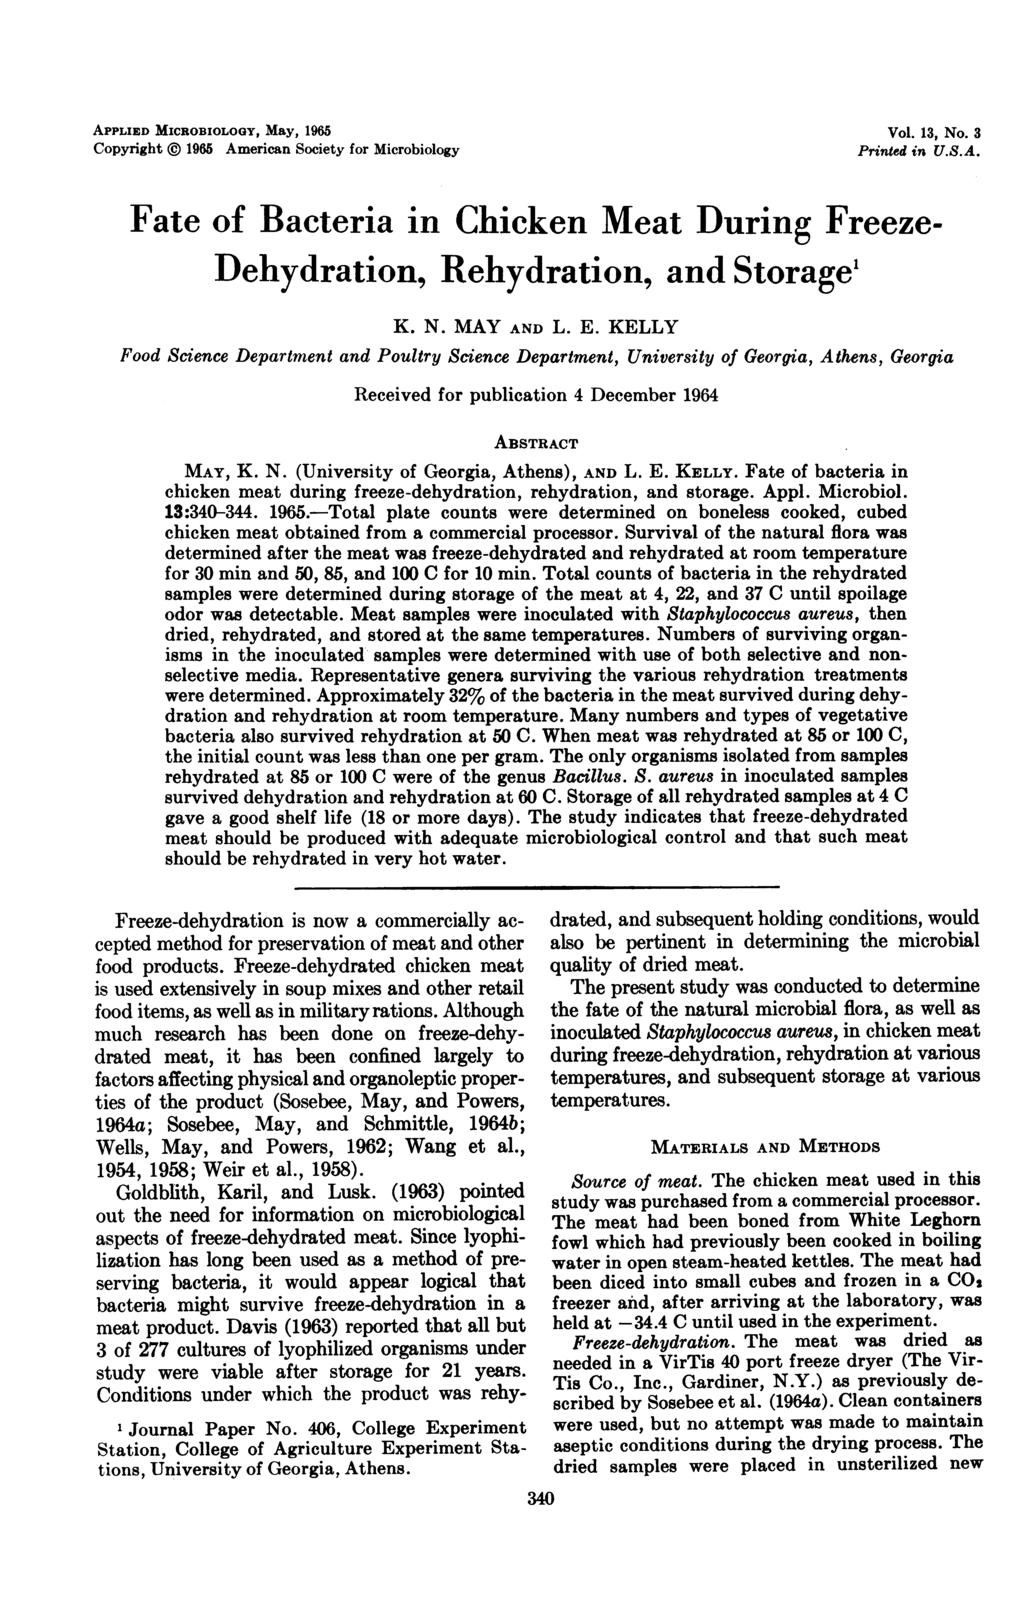 APPLIED MIROBIOLOGY, May, 1965 opyright 1965 American Society for Microbiology Vol. 13, No. 3 Printed in U.S.A. Fate of Bacteria in hicken Meat During Freeze- Dehydration, Rehydration, and Storagel K.